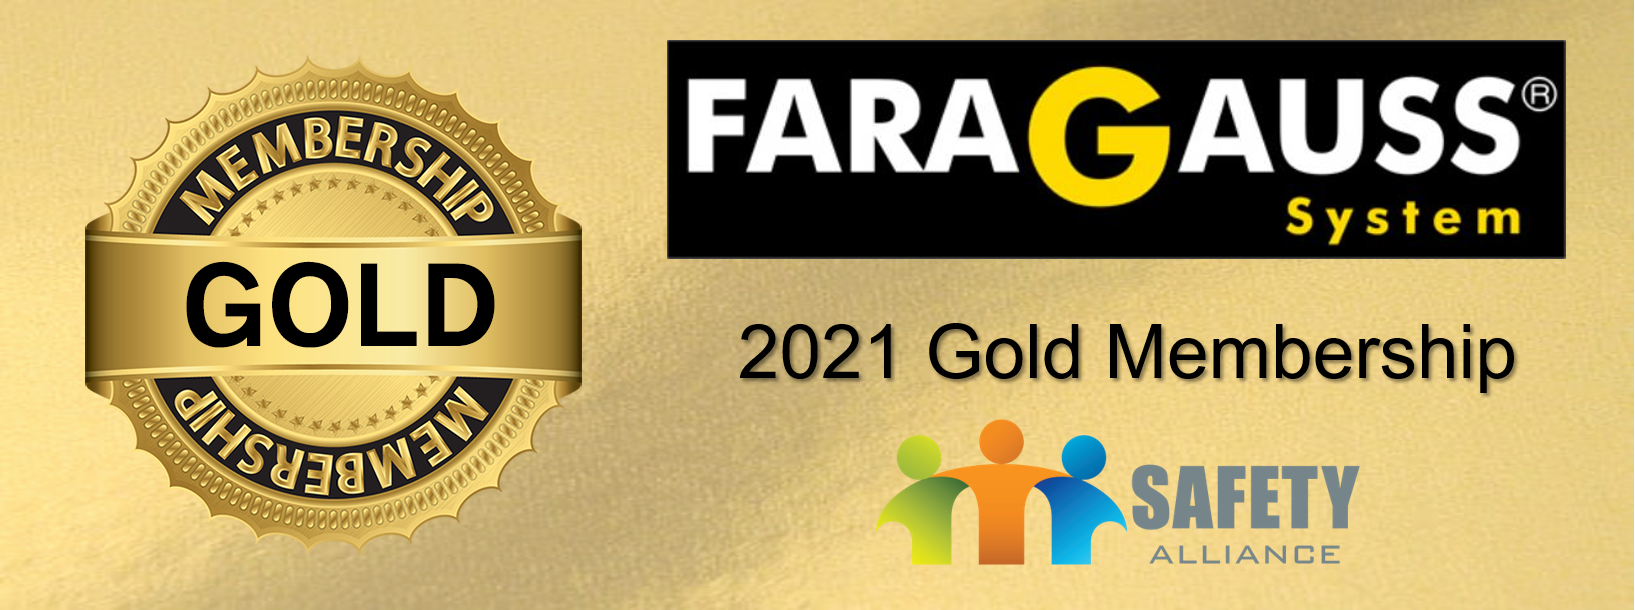 faragauss-system-safety-alliance-gold-membership-2021